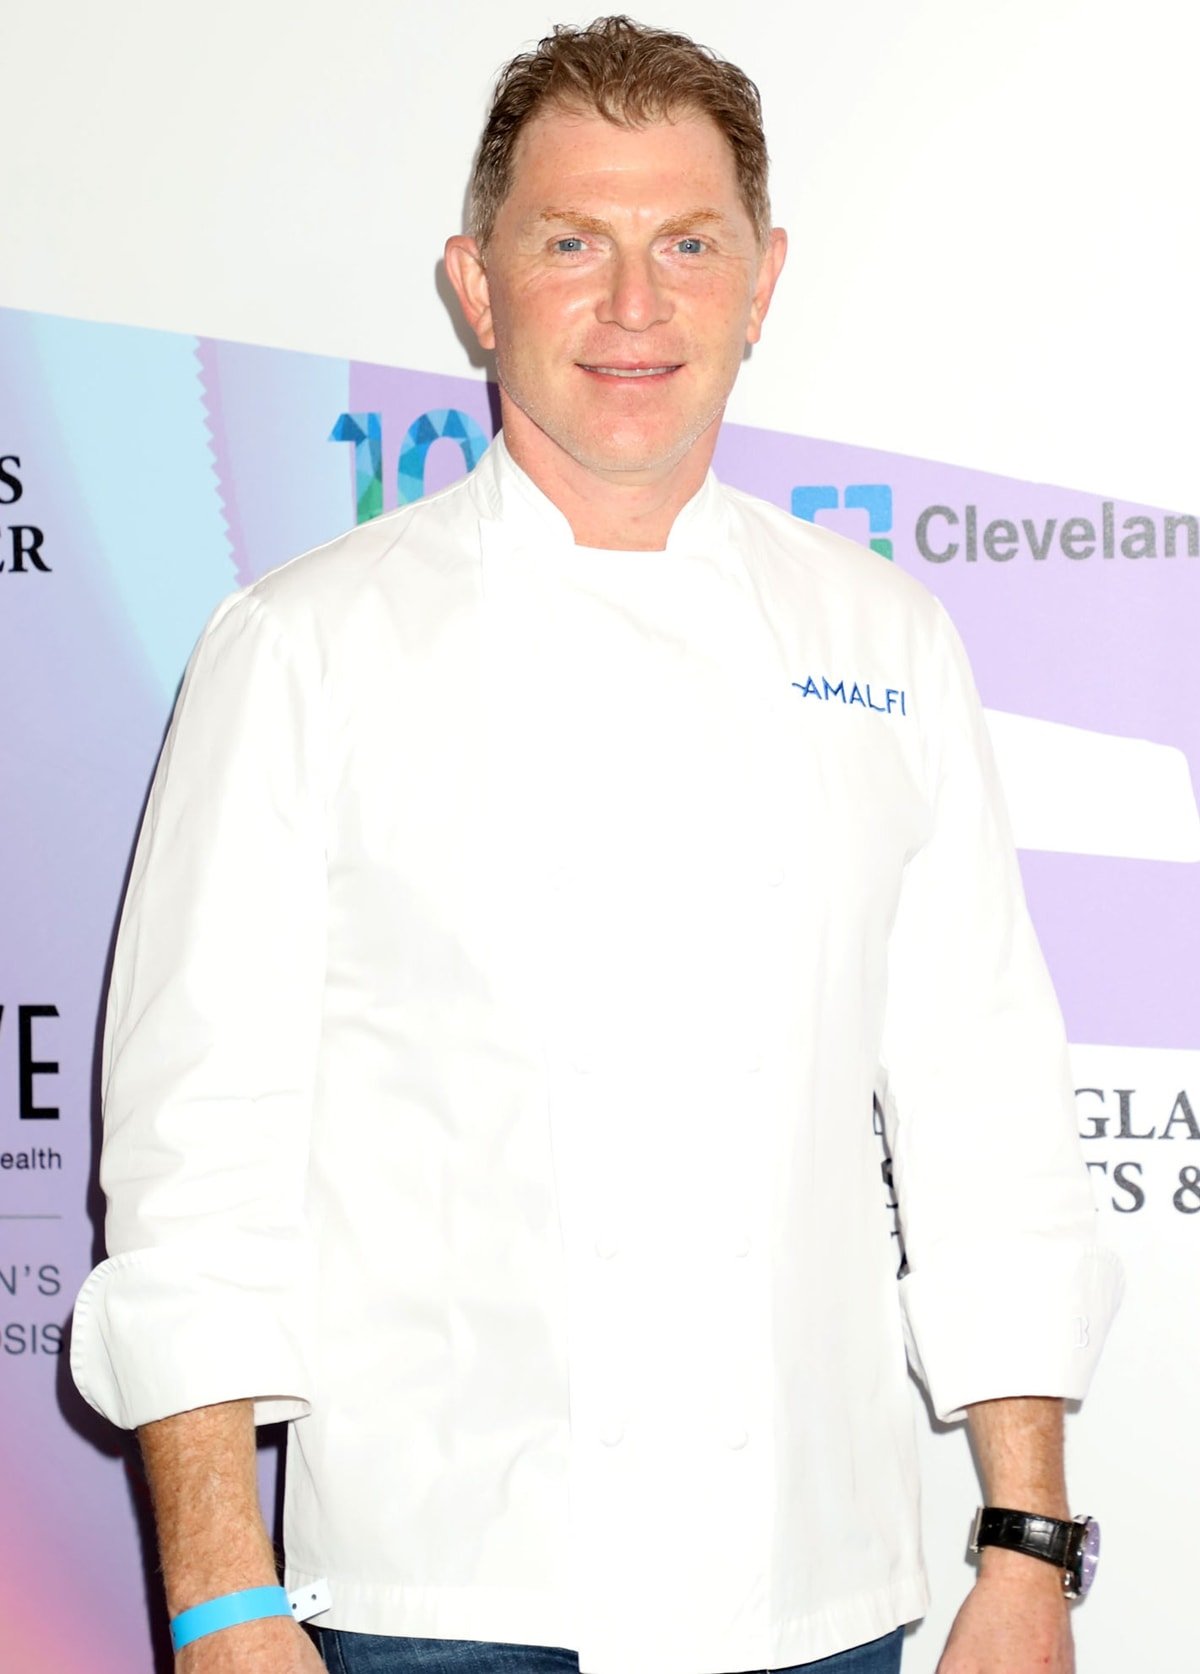 Bobby Flay has collaborated with the Food Network for several decades and is one of the world's richest chefs